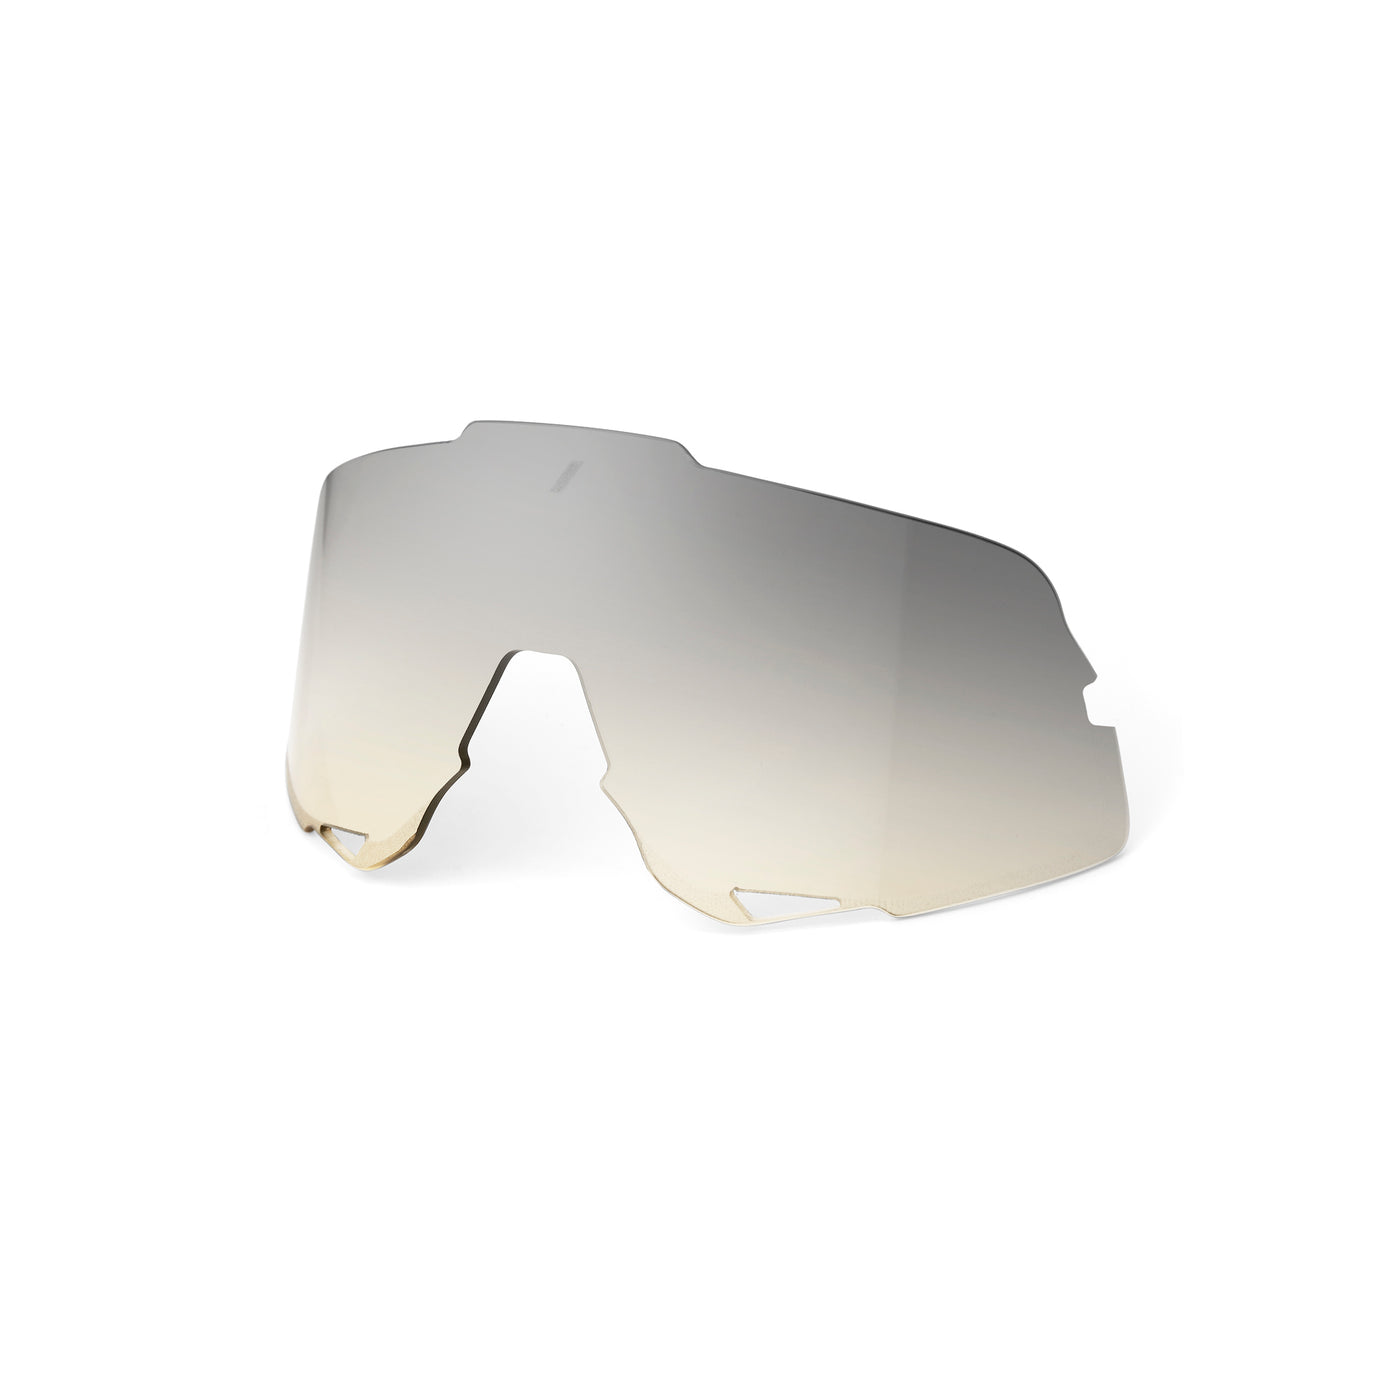 GLENDALE Replacement Lens - Low Light Yellow Silver Mirror